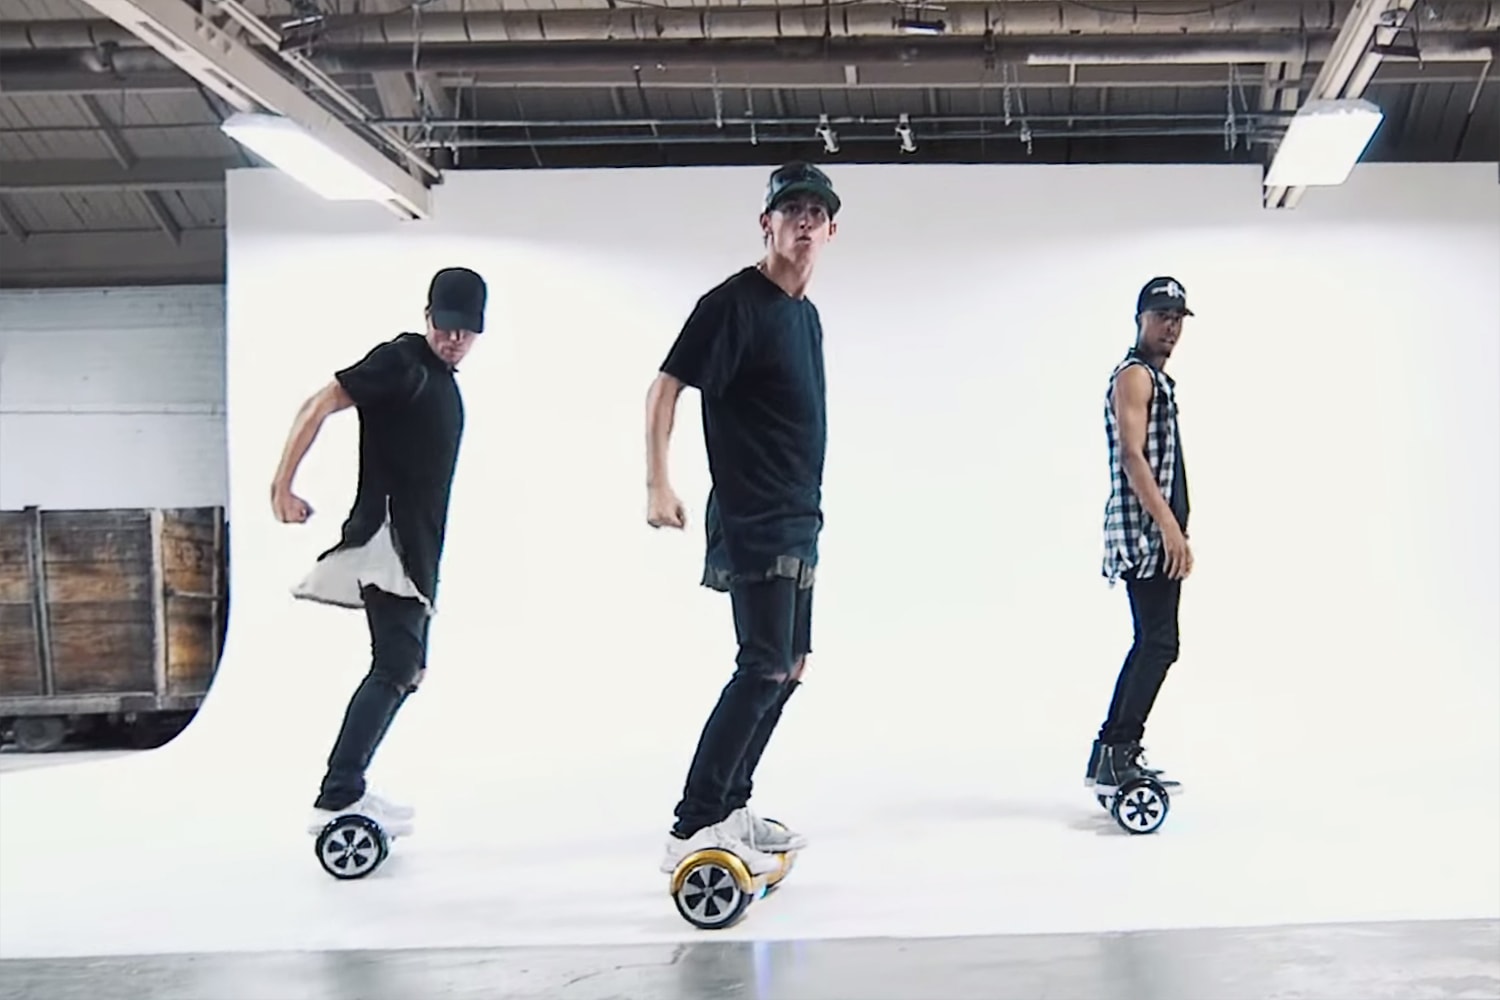 dance-video-justin-bieber-what-do-you-mean-segways-0